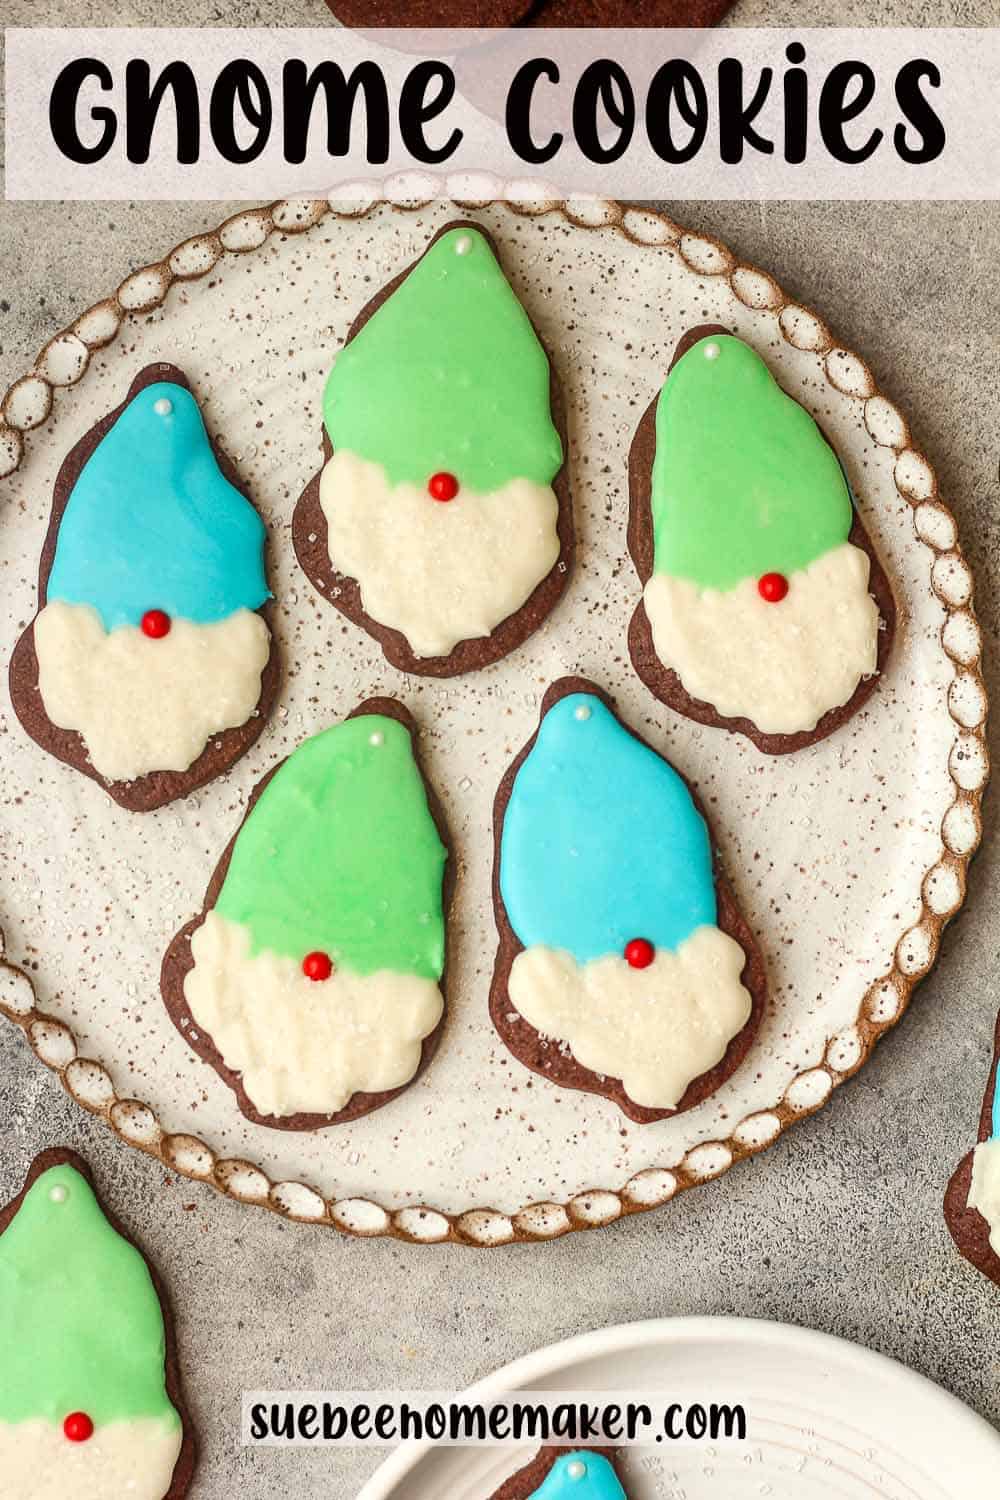 A large plate of gnome cookies.